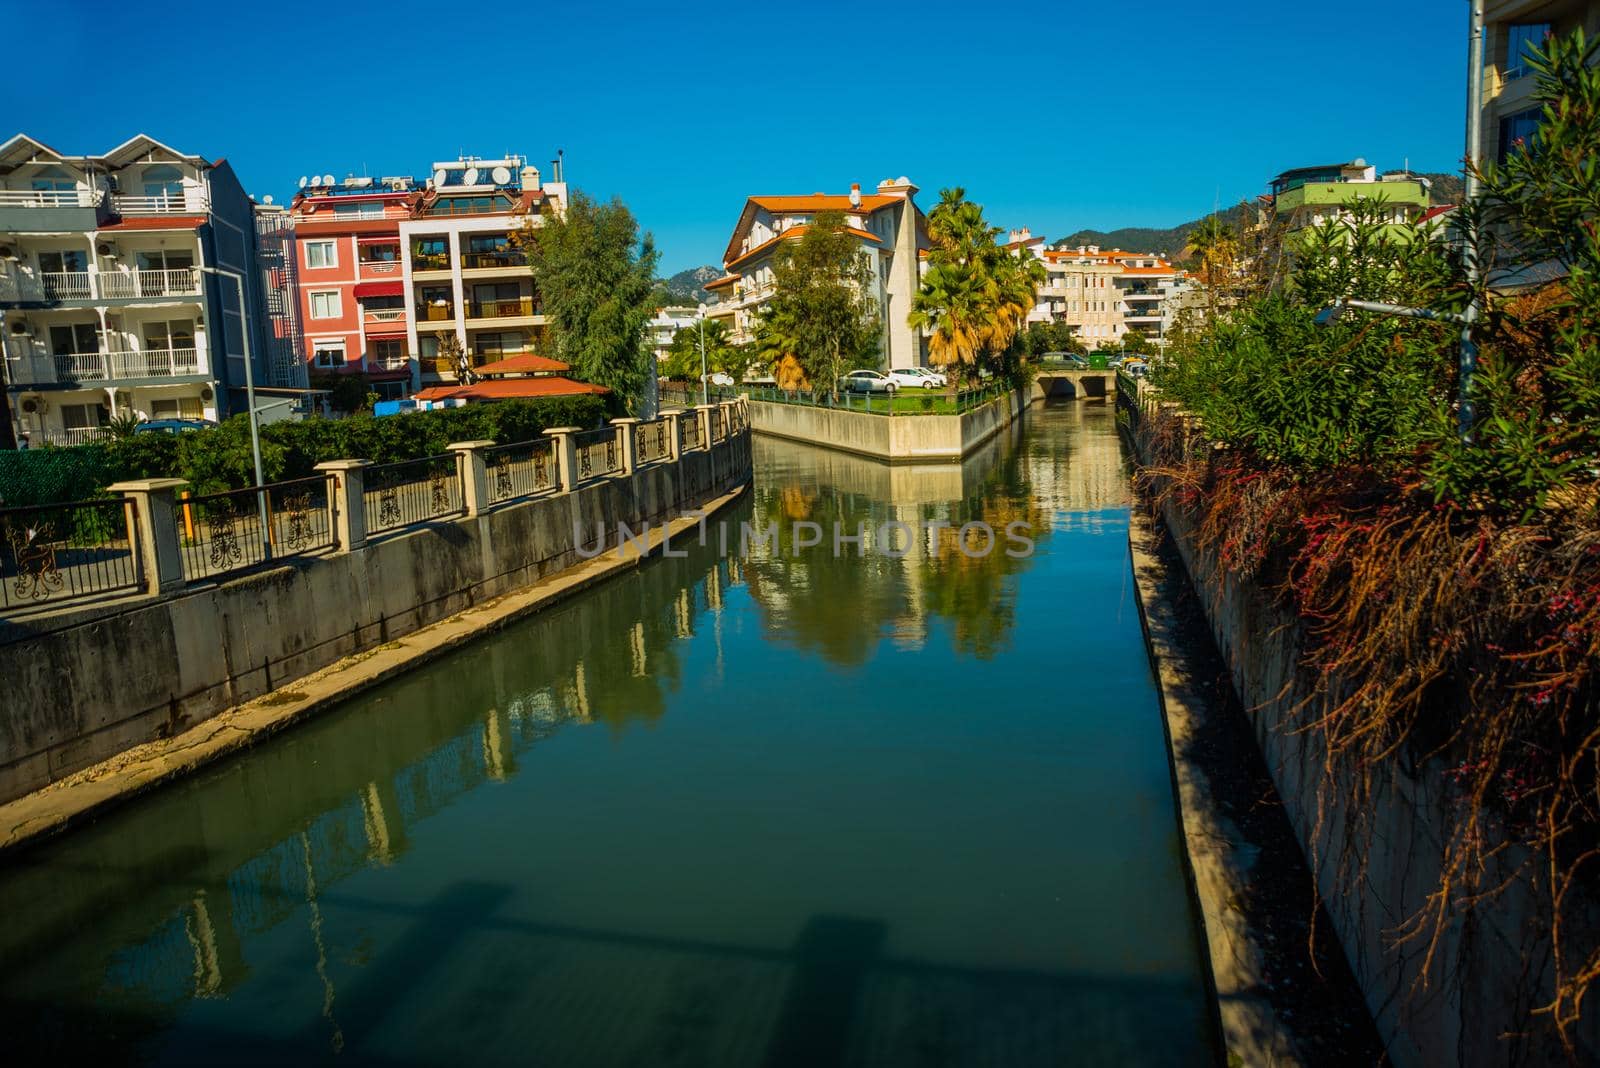 MARMARIS, MUGLA, TURKEY: Canal with water on the street of the city of Marmaris on a sunny day.